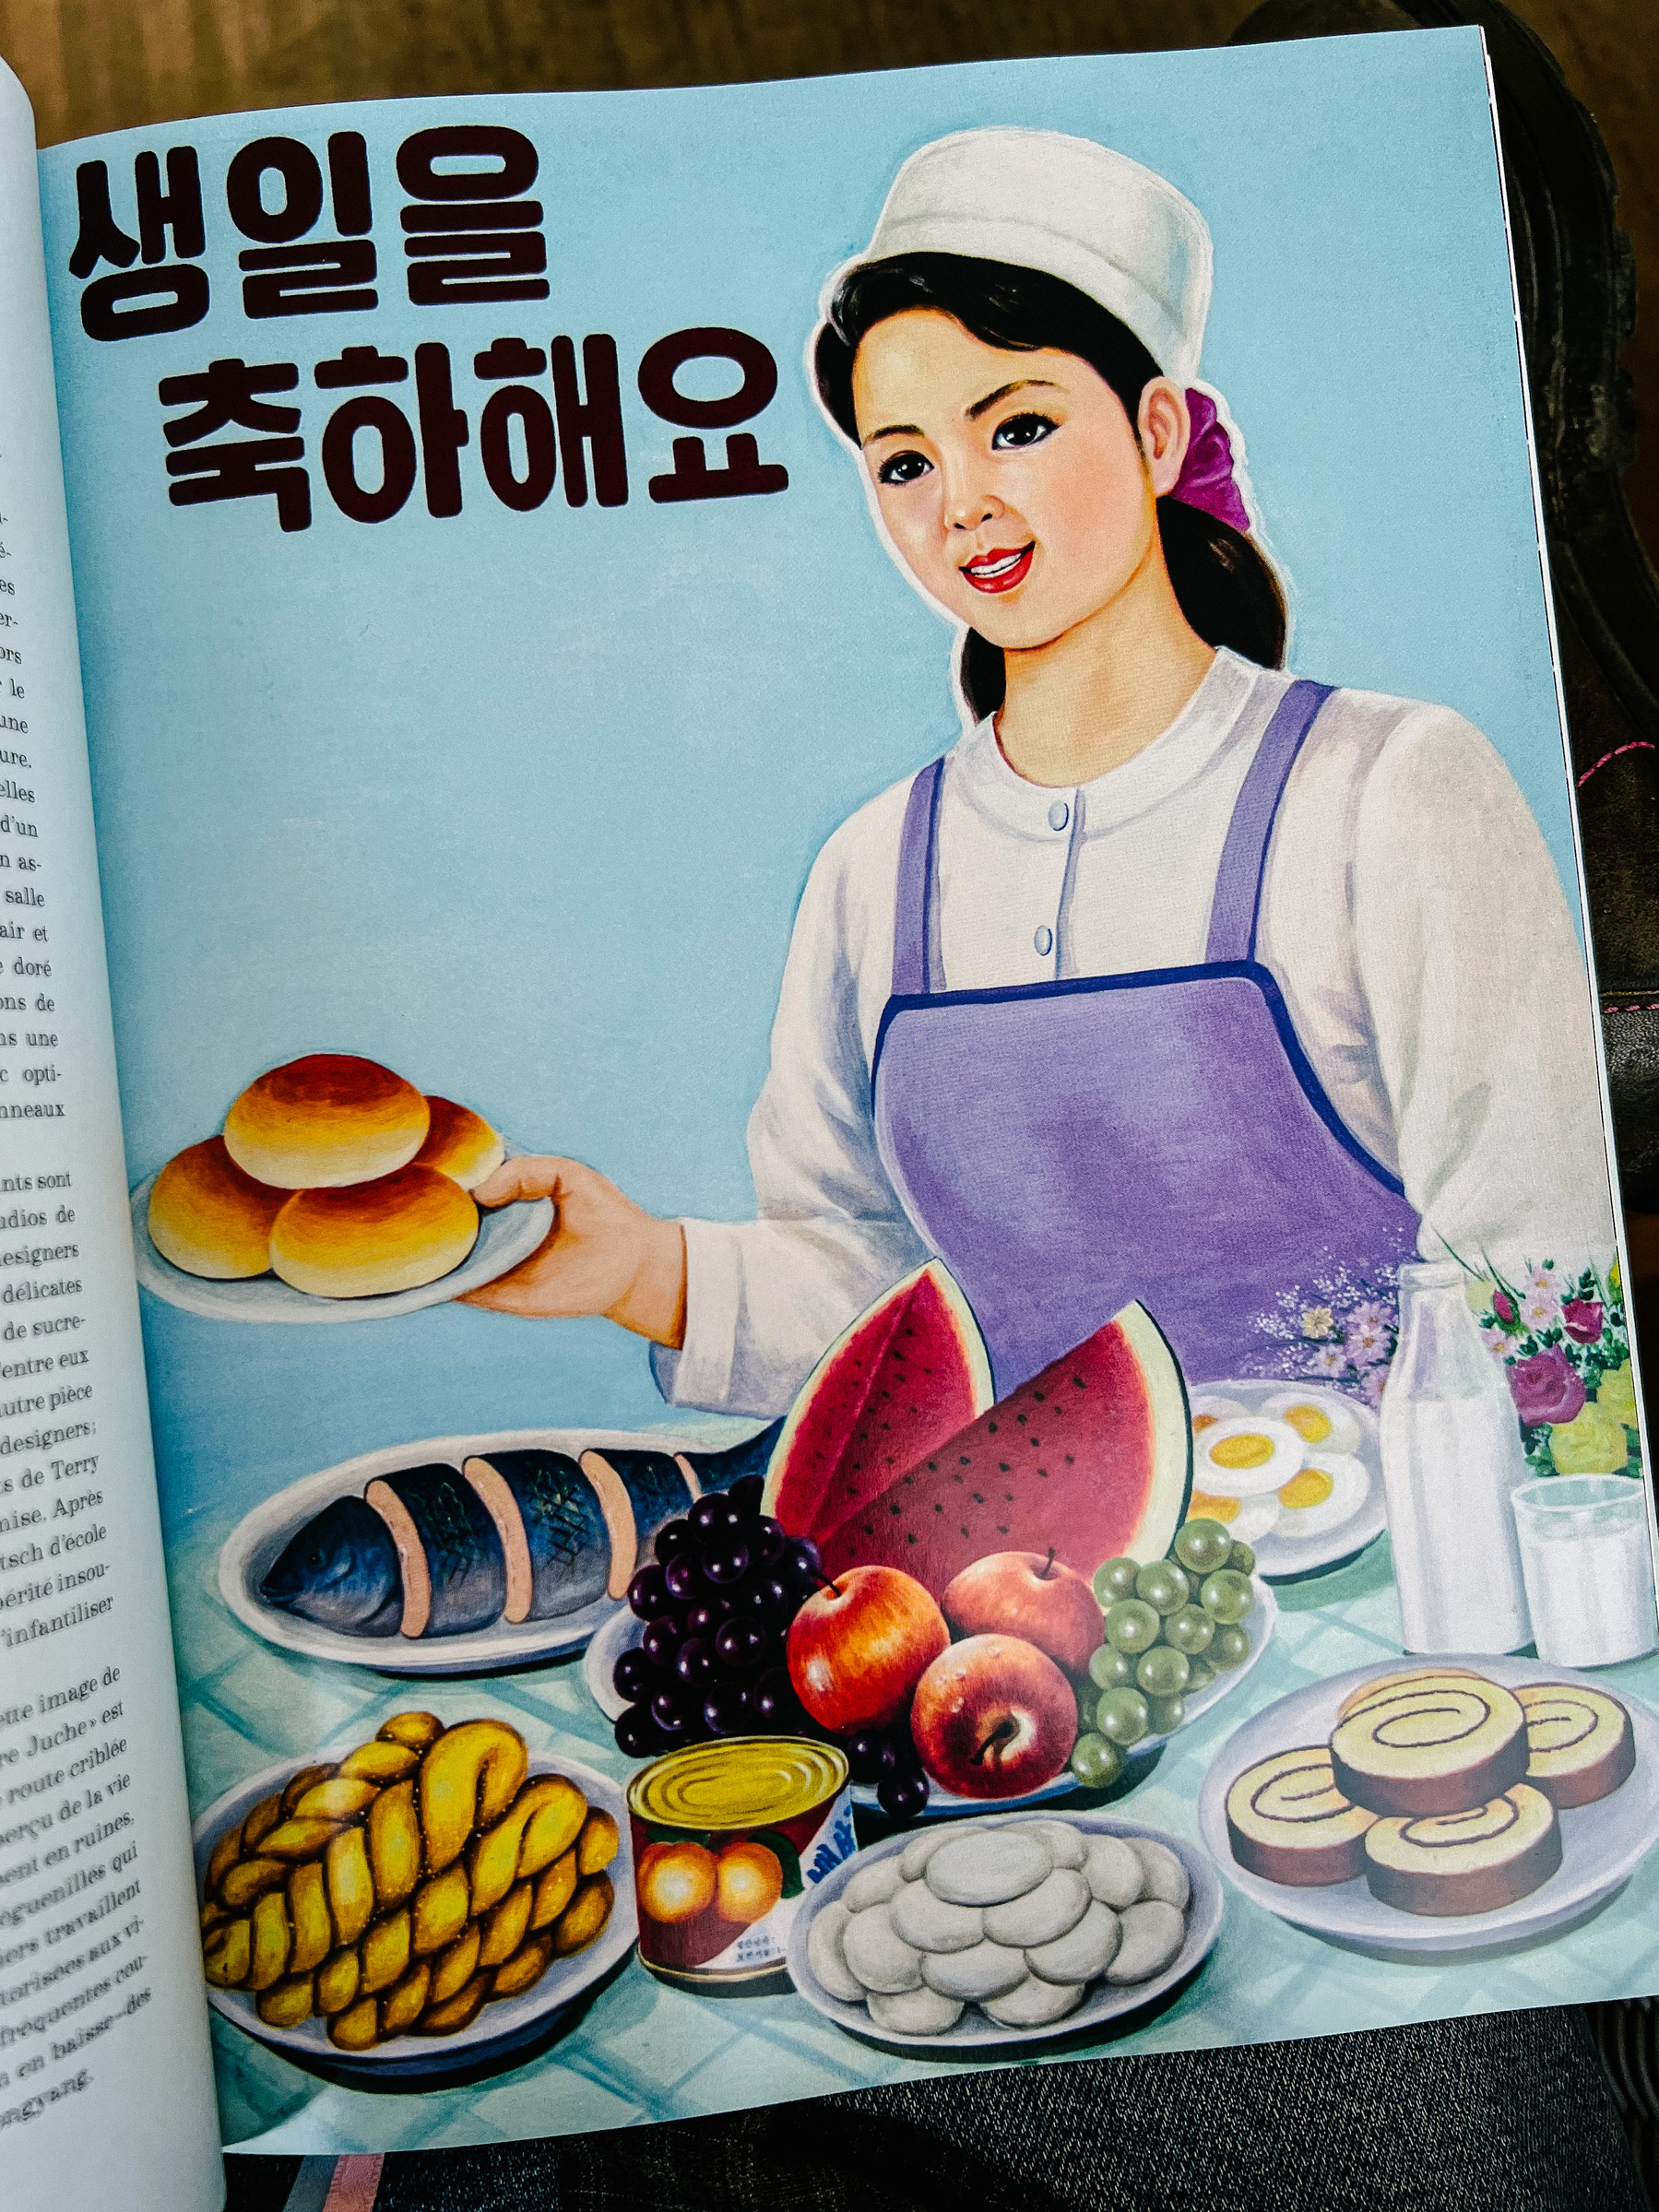 An ad, a woman holding a plate, and some food items on a table 